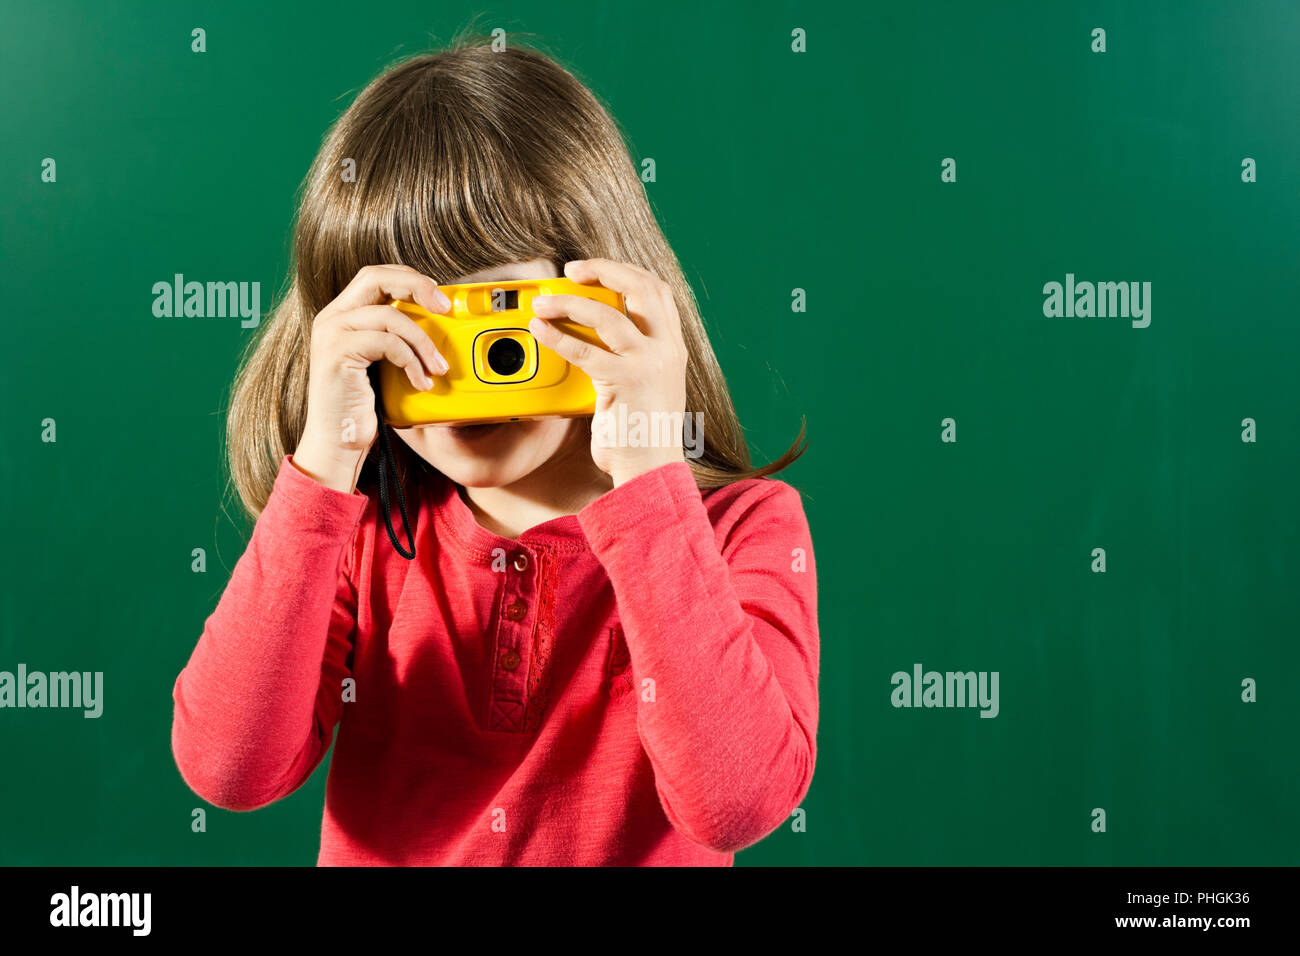 Little girl with photo camera Stock Photo